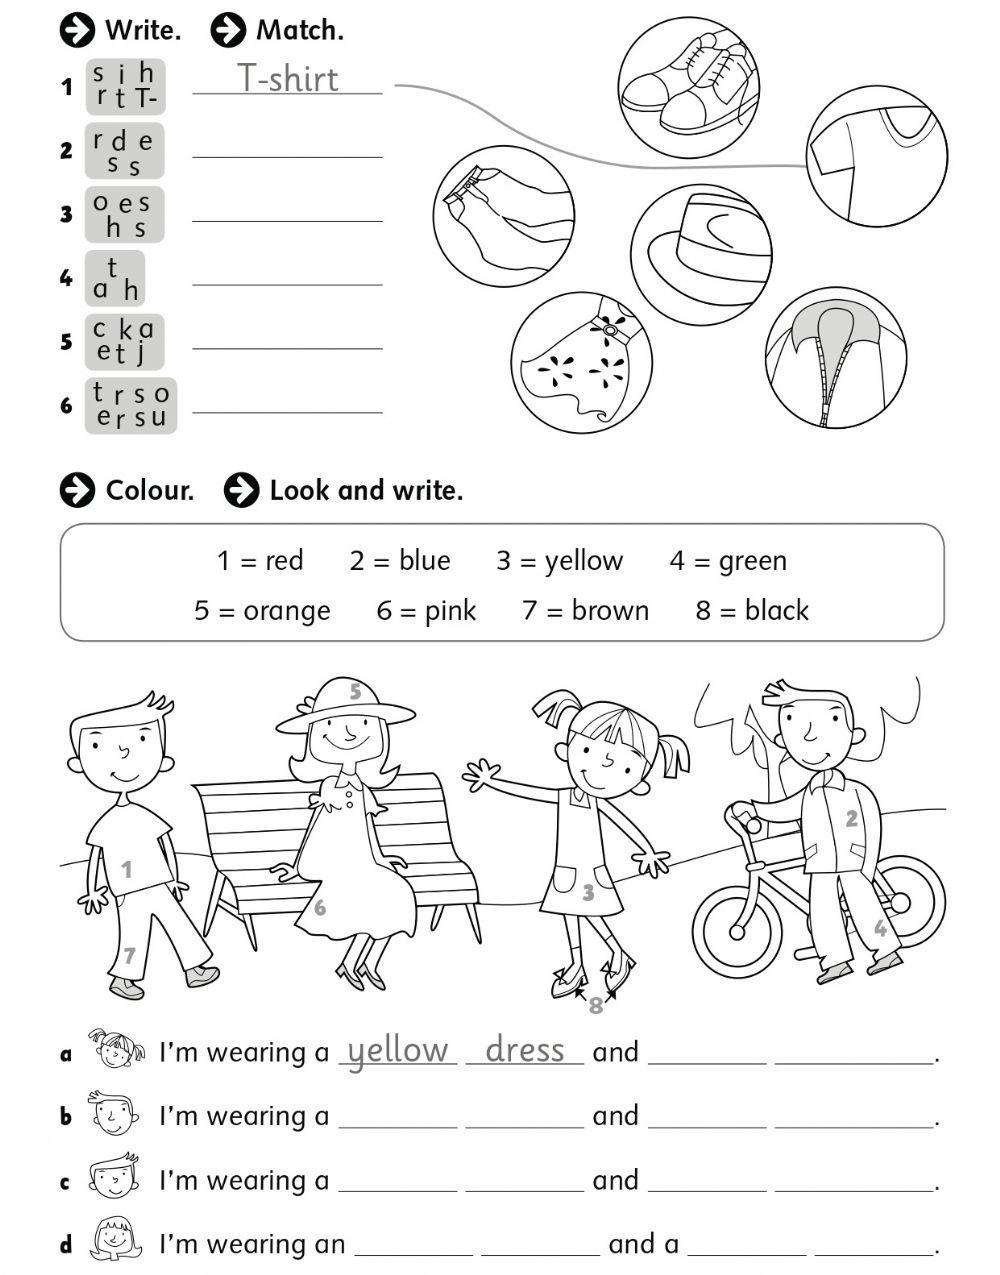 Clothes online exercise for Elementary